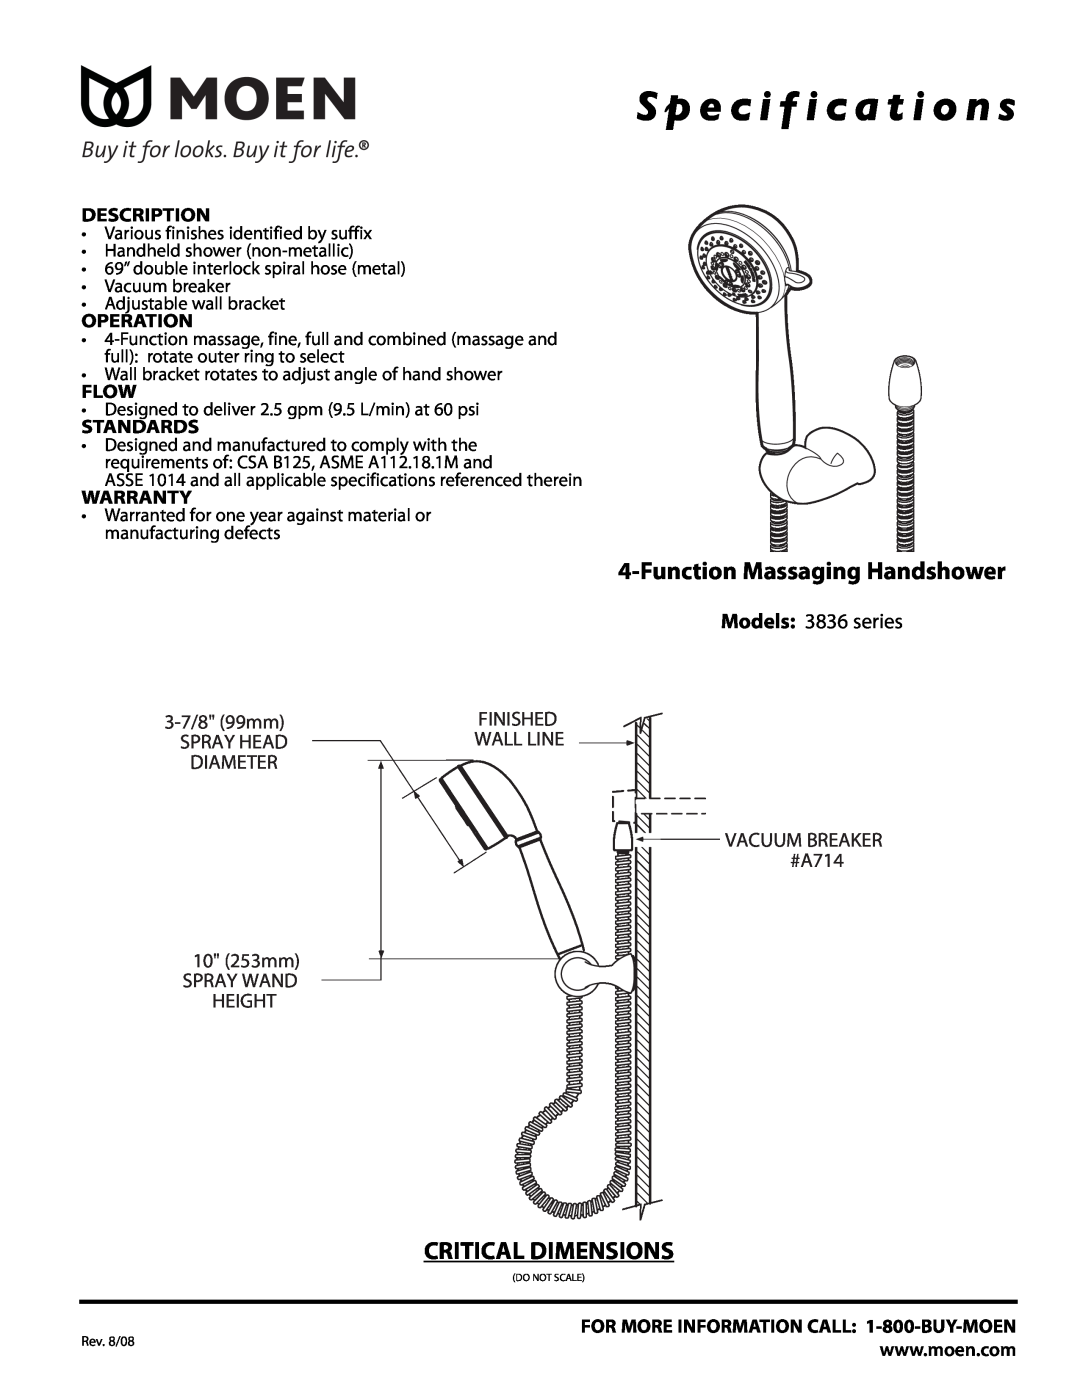 Moen 3836 series specifications S p e c i f i c a t i o n s, Function Massaging Handshower, Critical Dimensions, Operation 